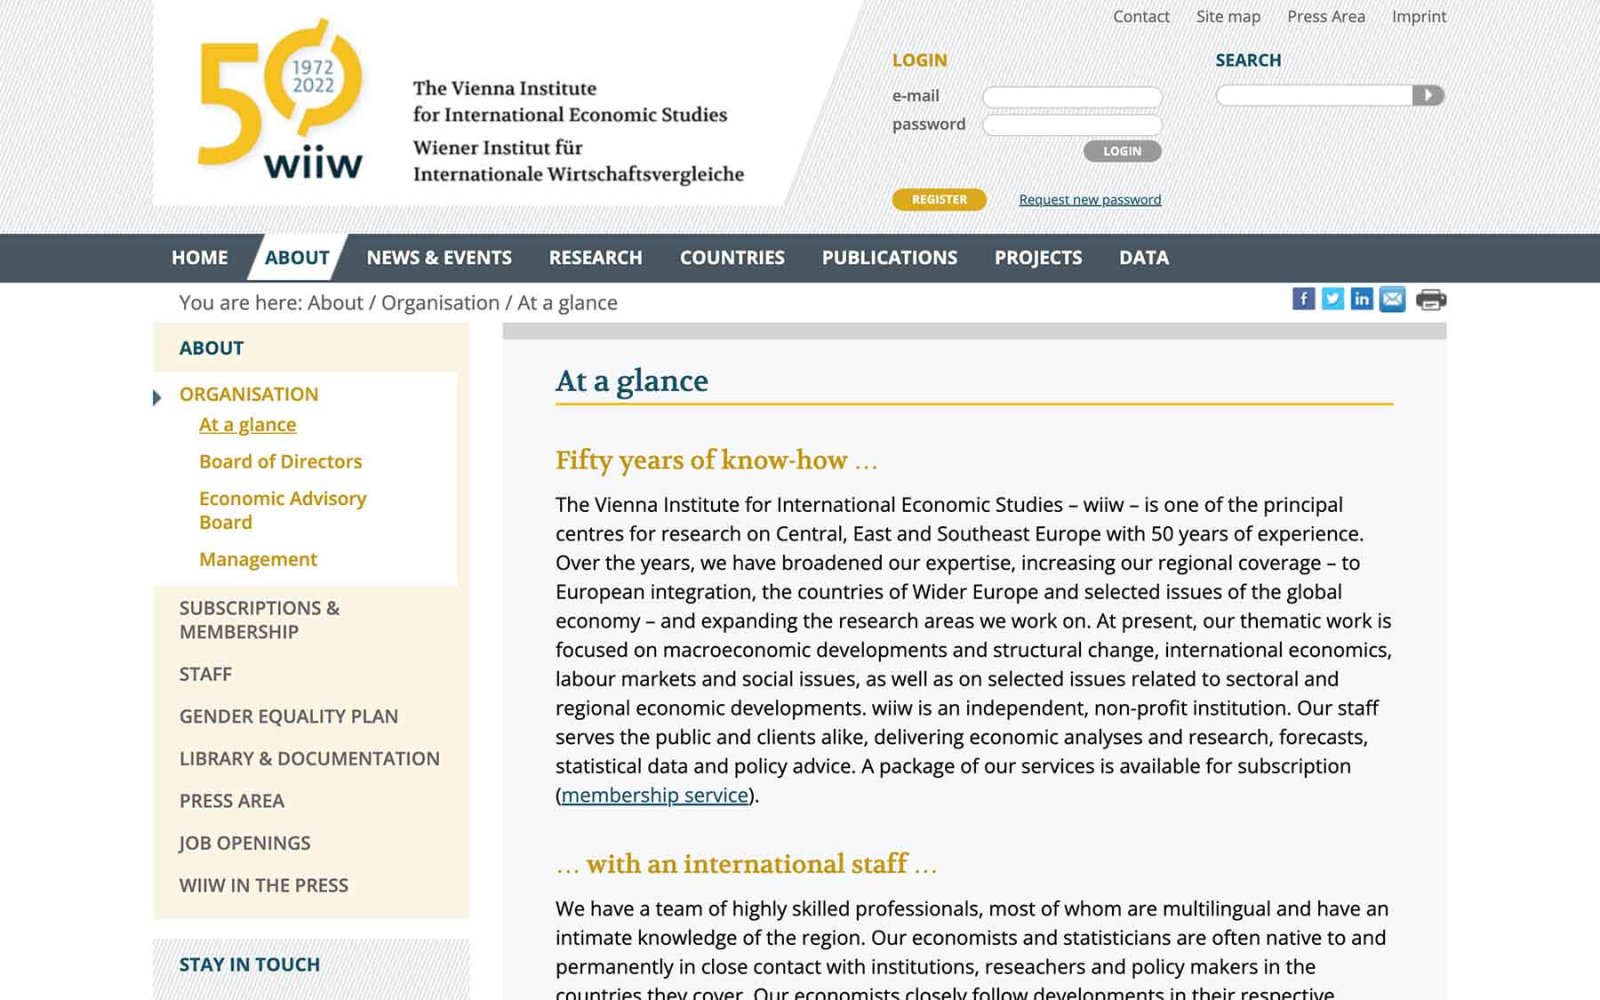 Website wiiw, The Vienna Institute for International Economic Studies – about